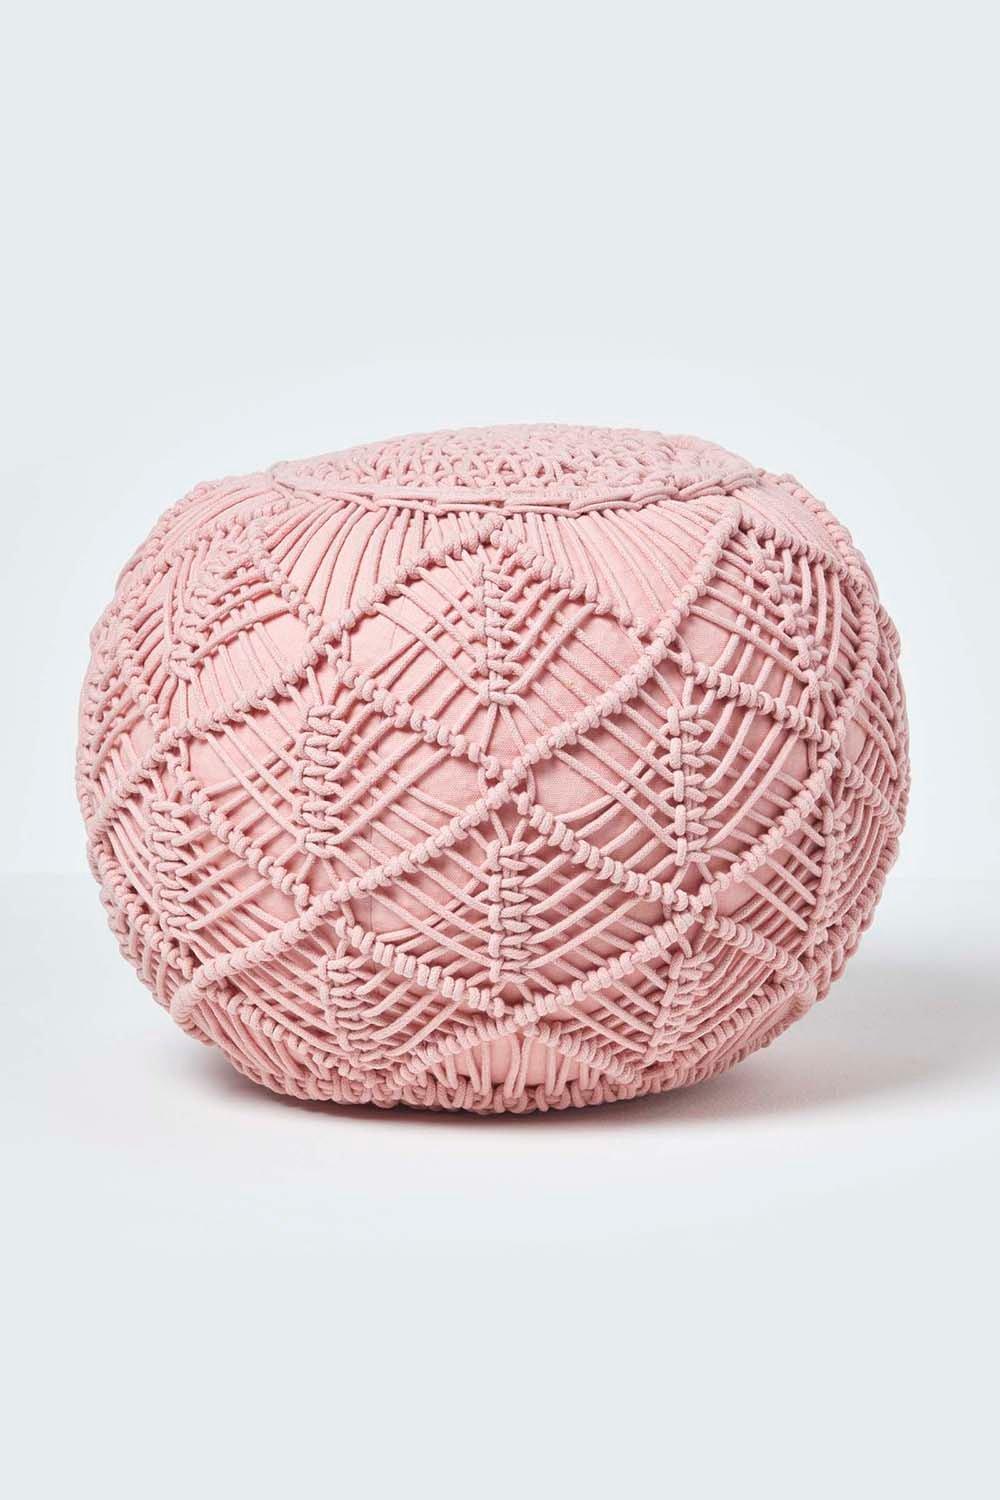 Homescapes Macrame Knitted Pouffe 35 x 40 cm|pink